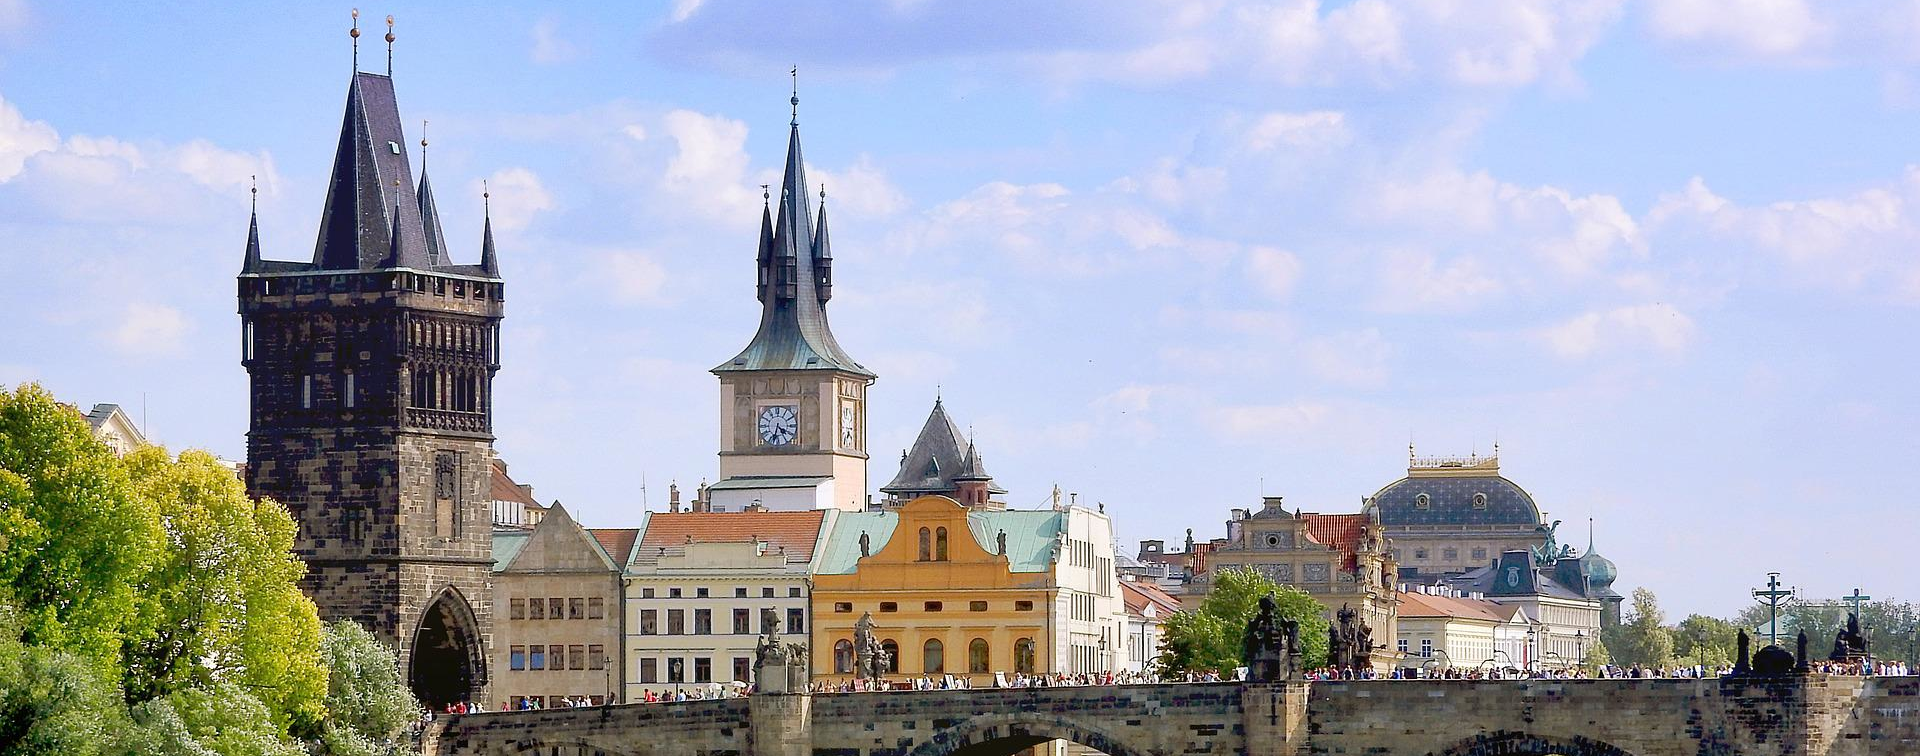 DLM Forum Members' Meeting in Prague, 8-9 September 2022 - Call for papers, Registration Open